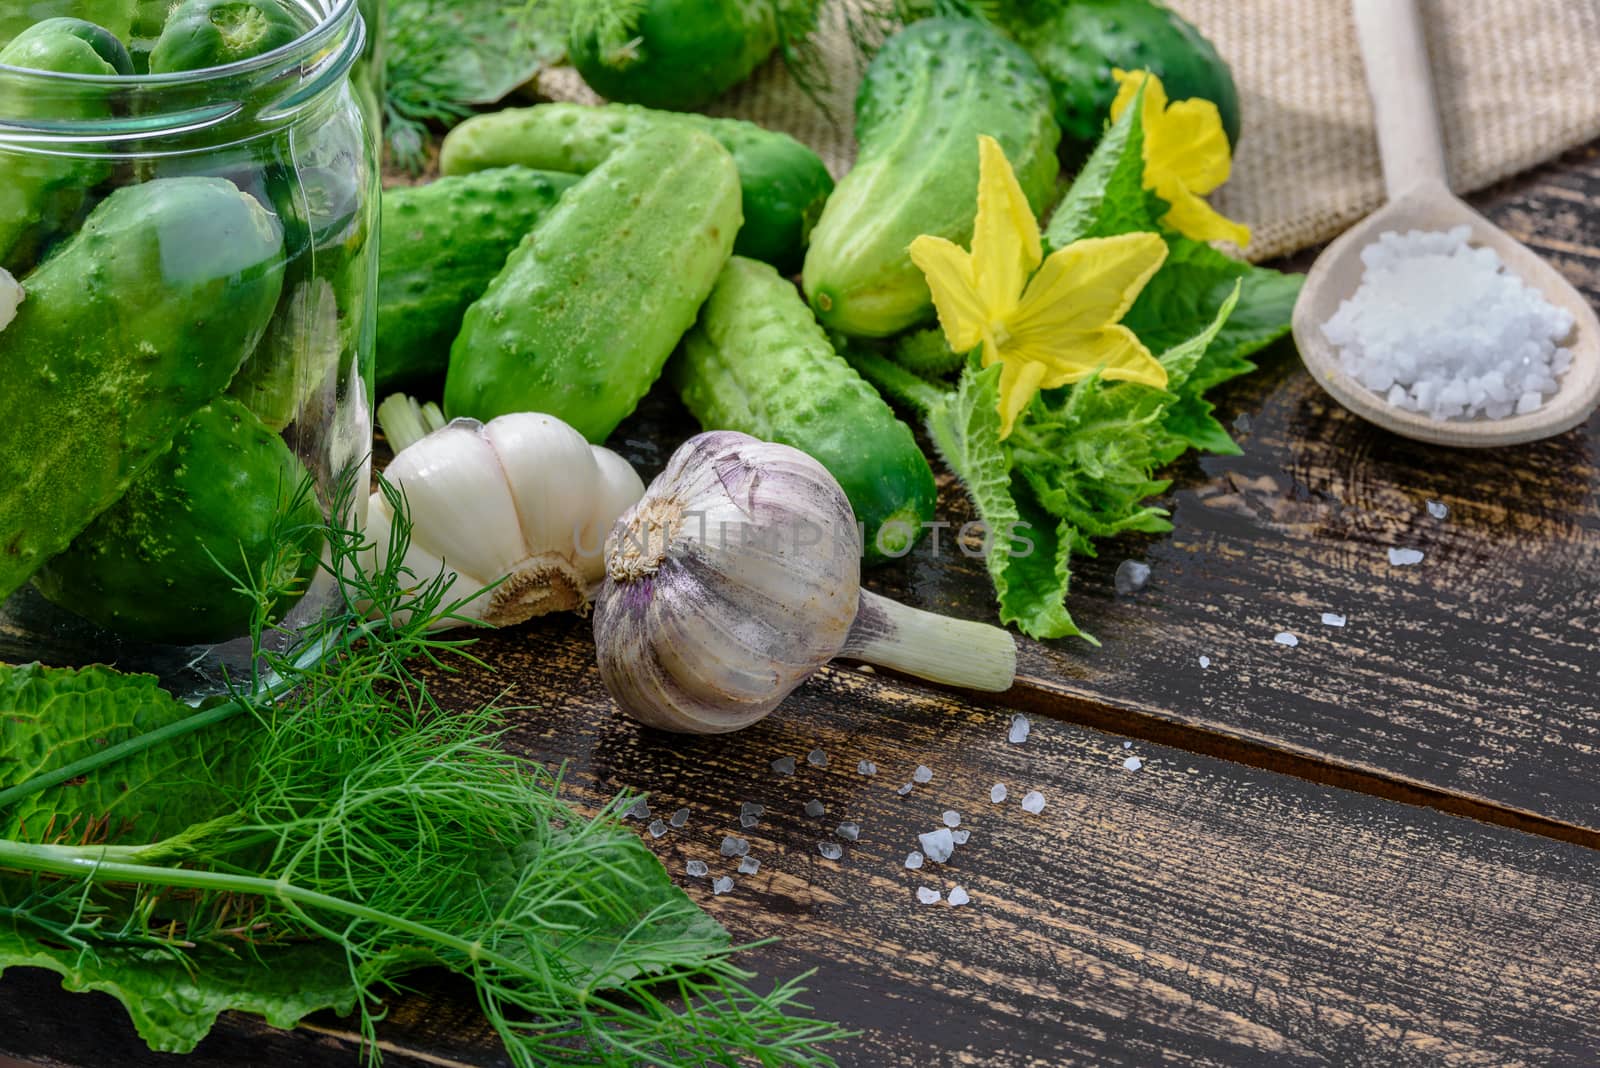 The concept of ingredients of homemade preserves - jars of pickled cucumbers on a wooden table next to raw green ground cucumbers, dill, sea salt, garlic and horseradish.